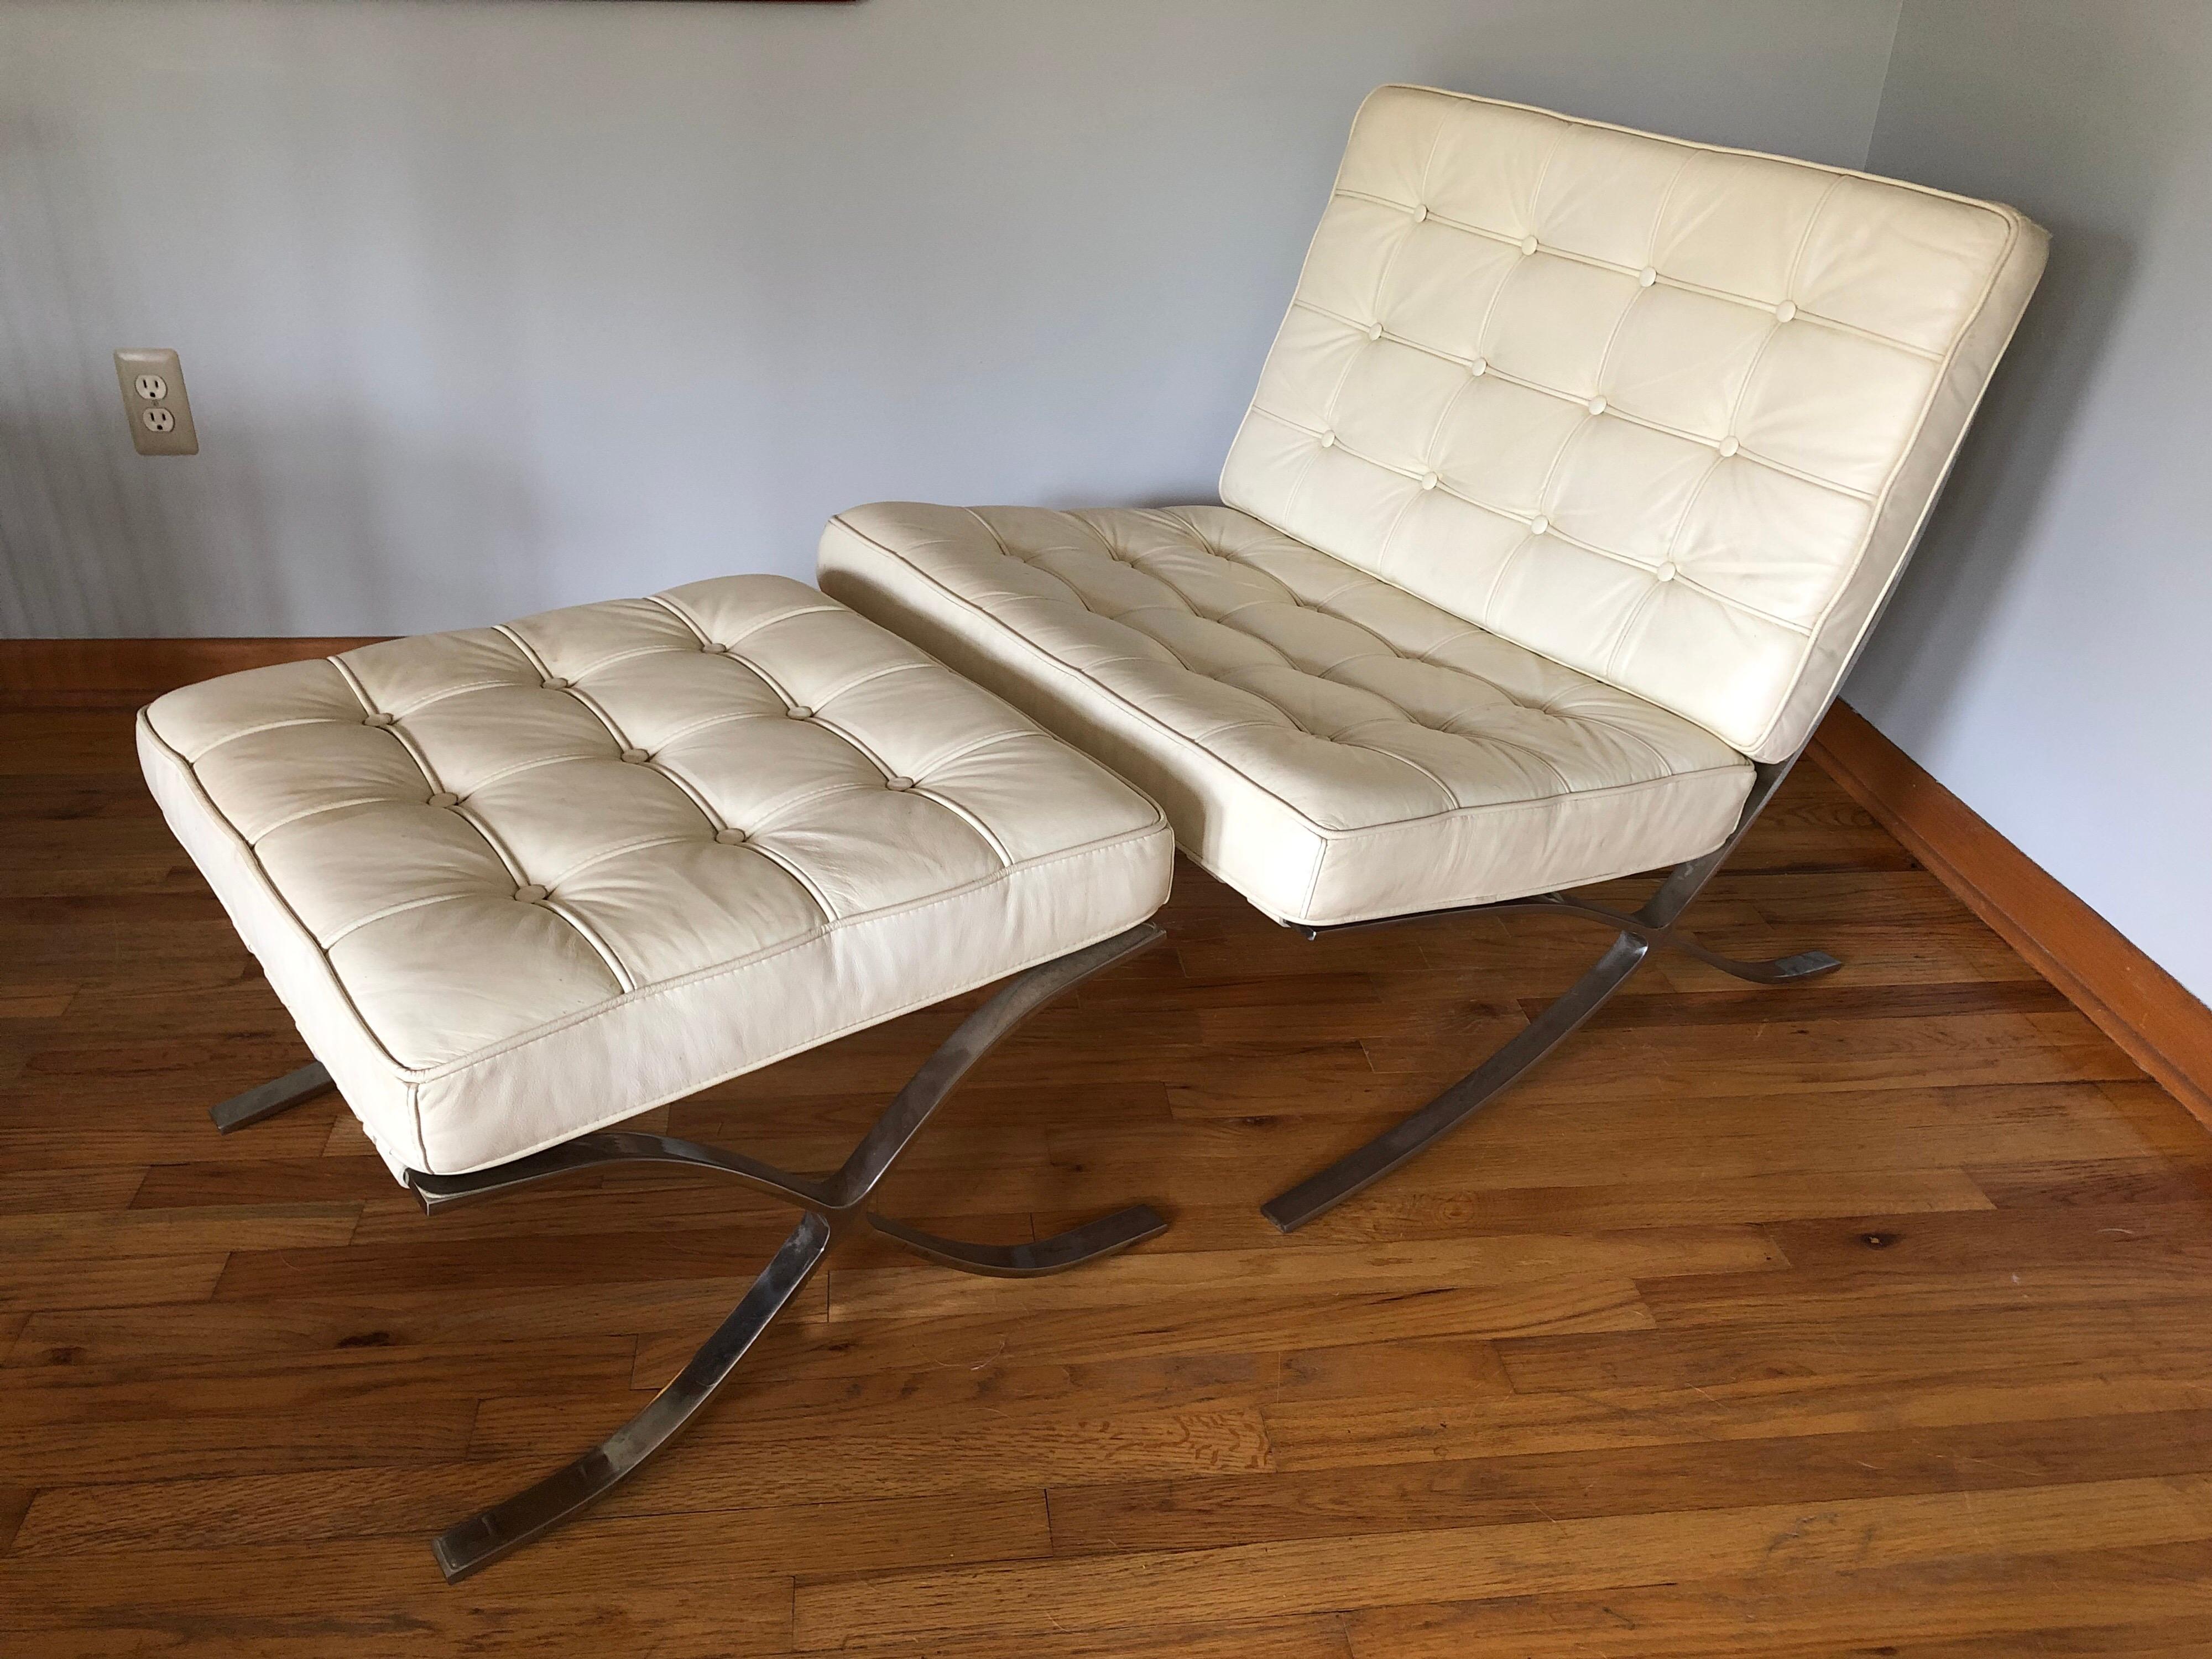 Italian Barcelona chair and ottoman in white leather attributed to Mies van der Rohe. Highest quality and solid construction.
Chair measures 30